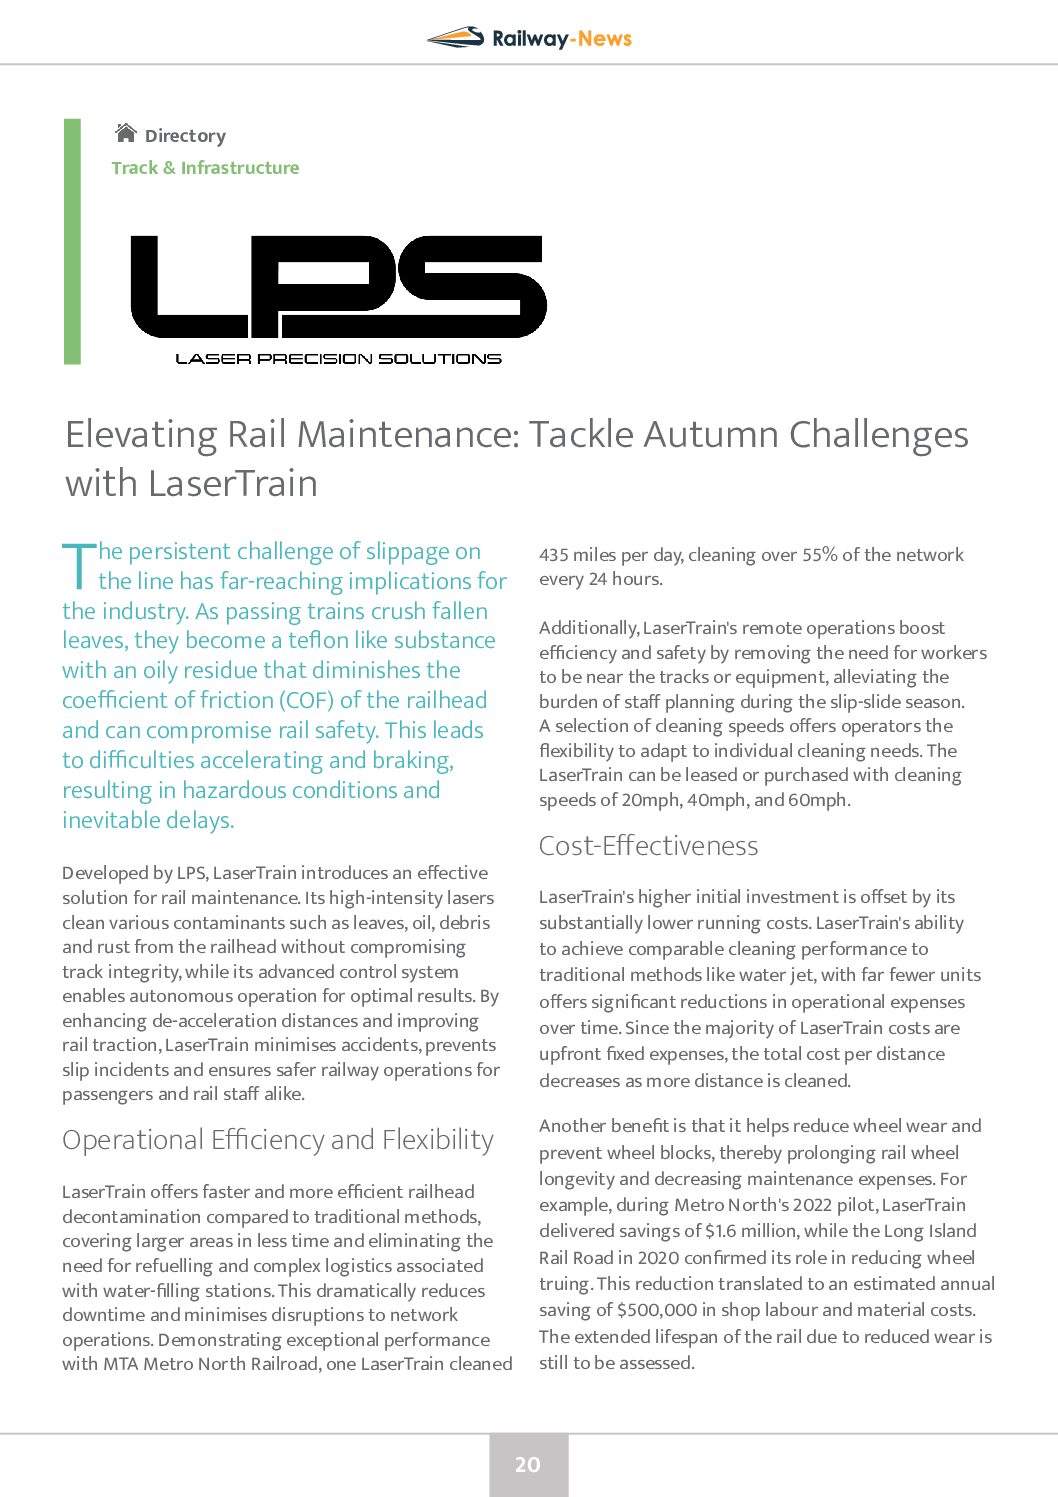 Elevating Rail Maintenance: Tackle Autumn Challenges with LaserTrain